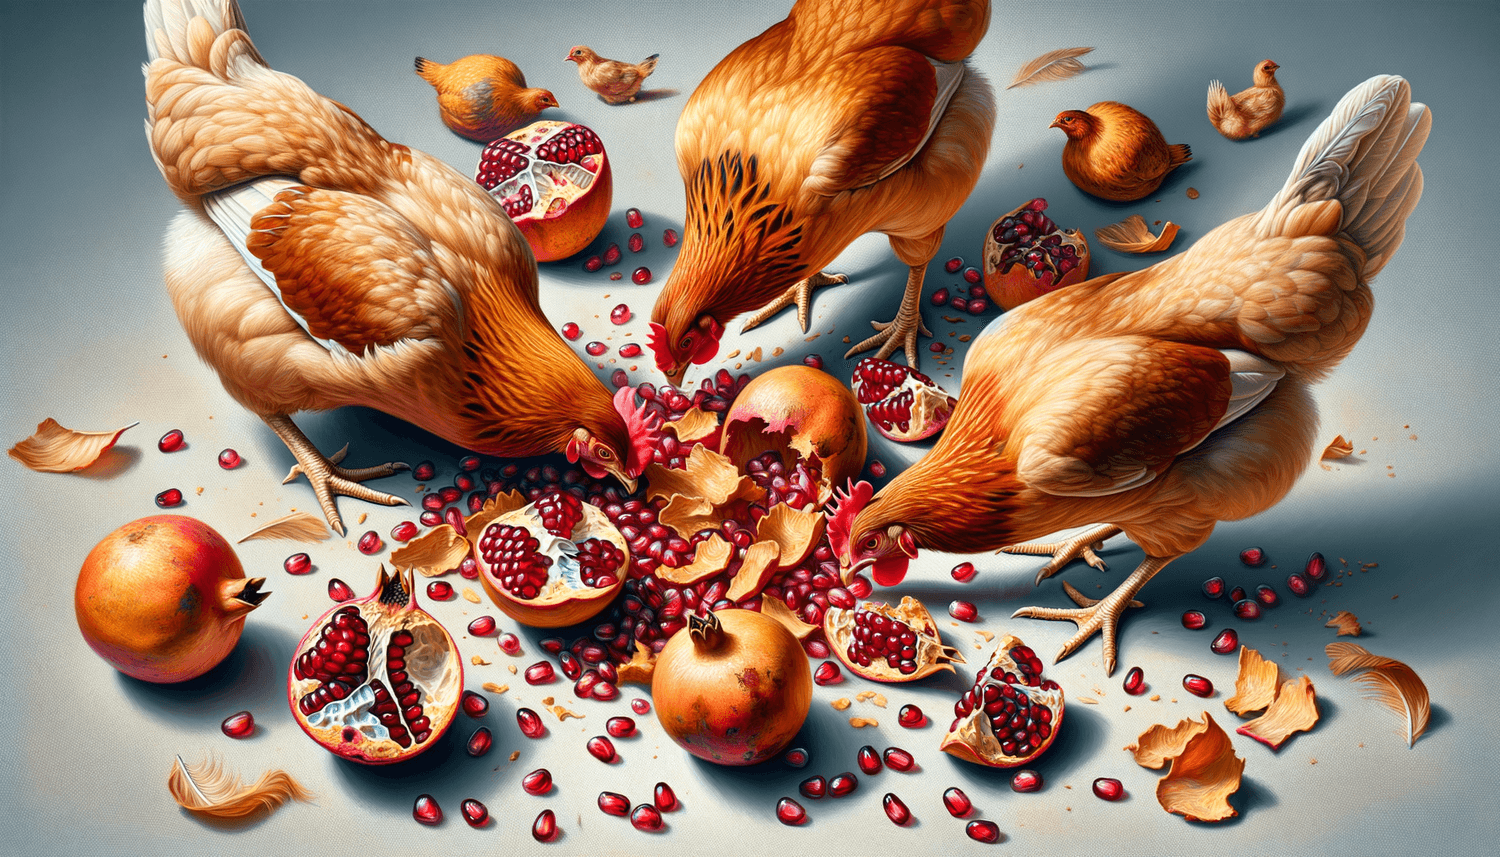 Can Chickens Eat Pomegranate Skin?